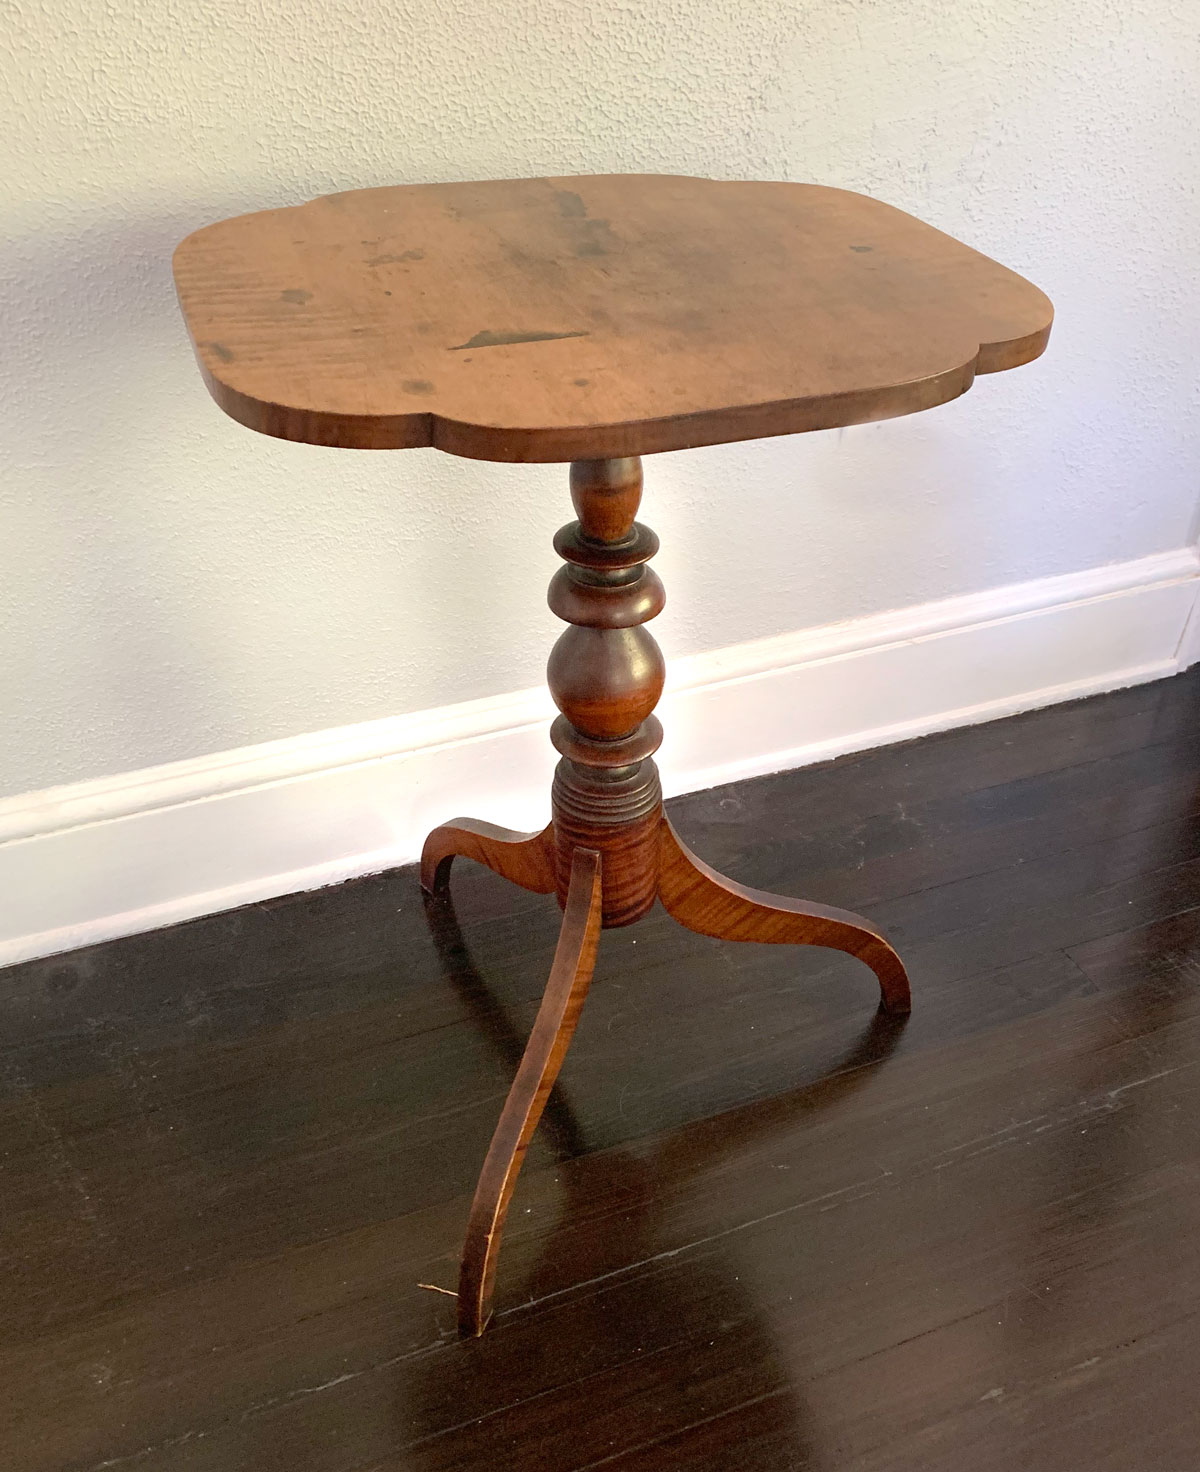 TIGER MAPLE CANDLE STAND American 36c4e1